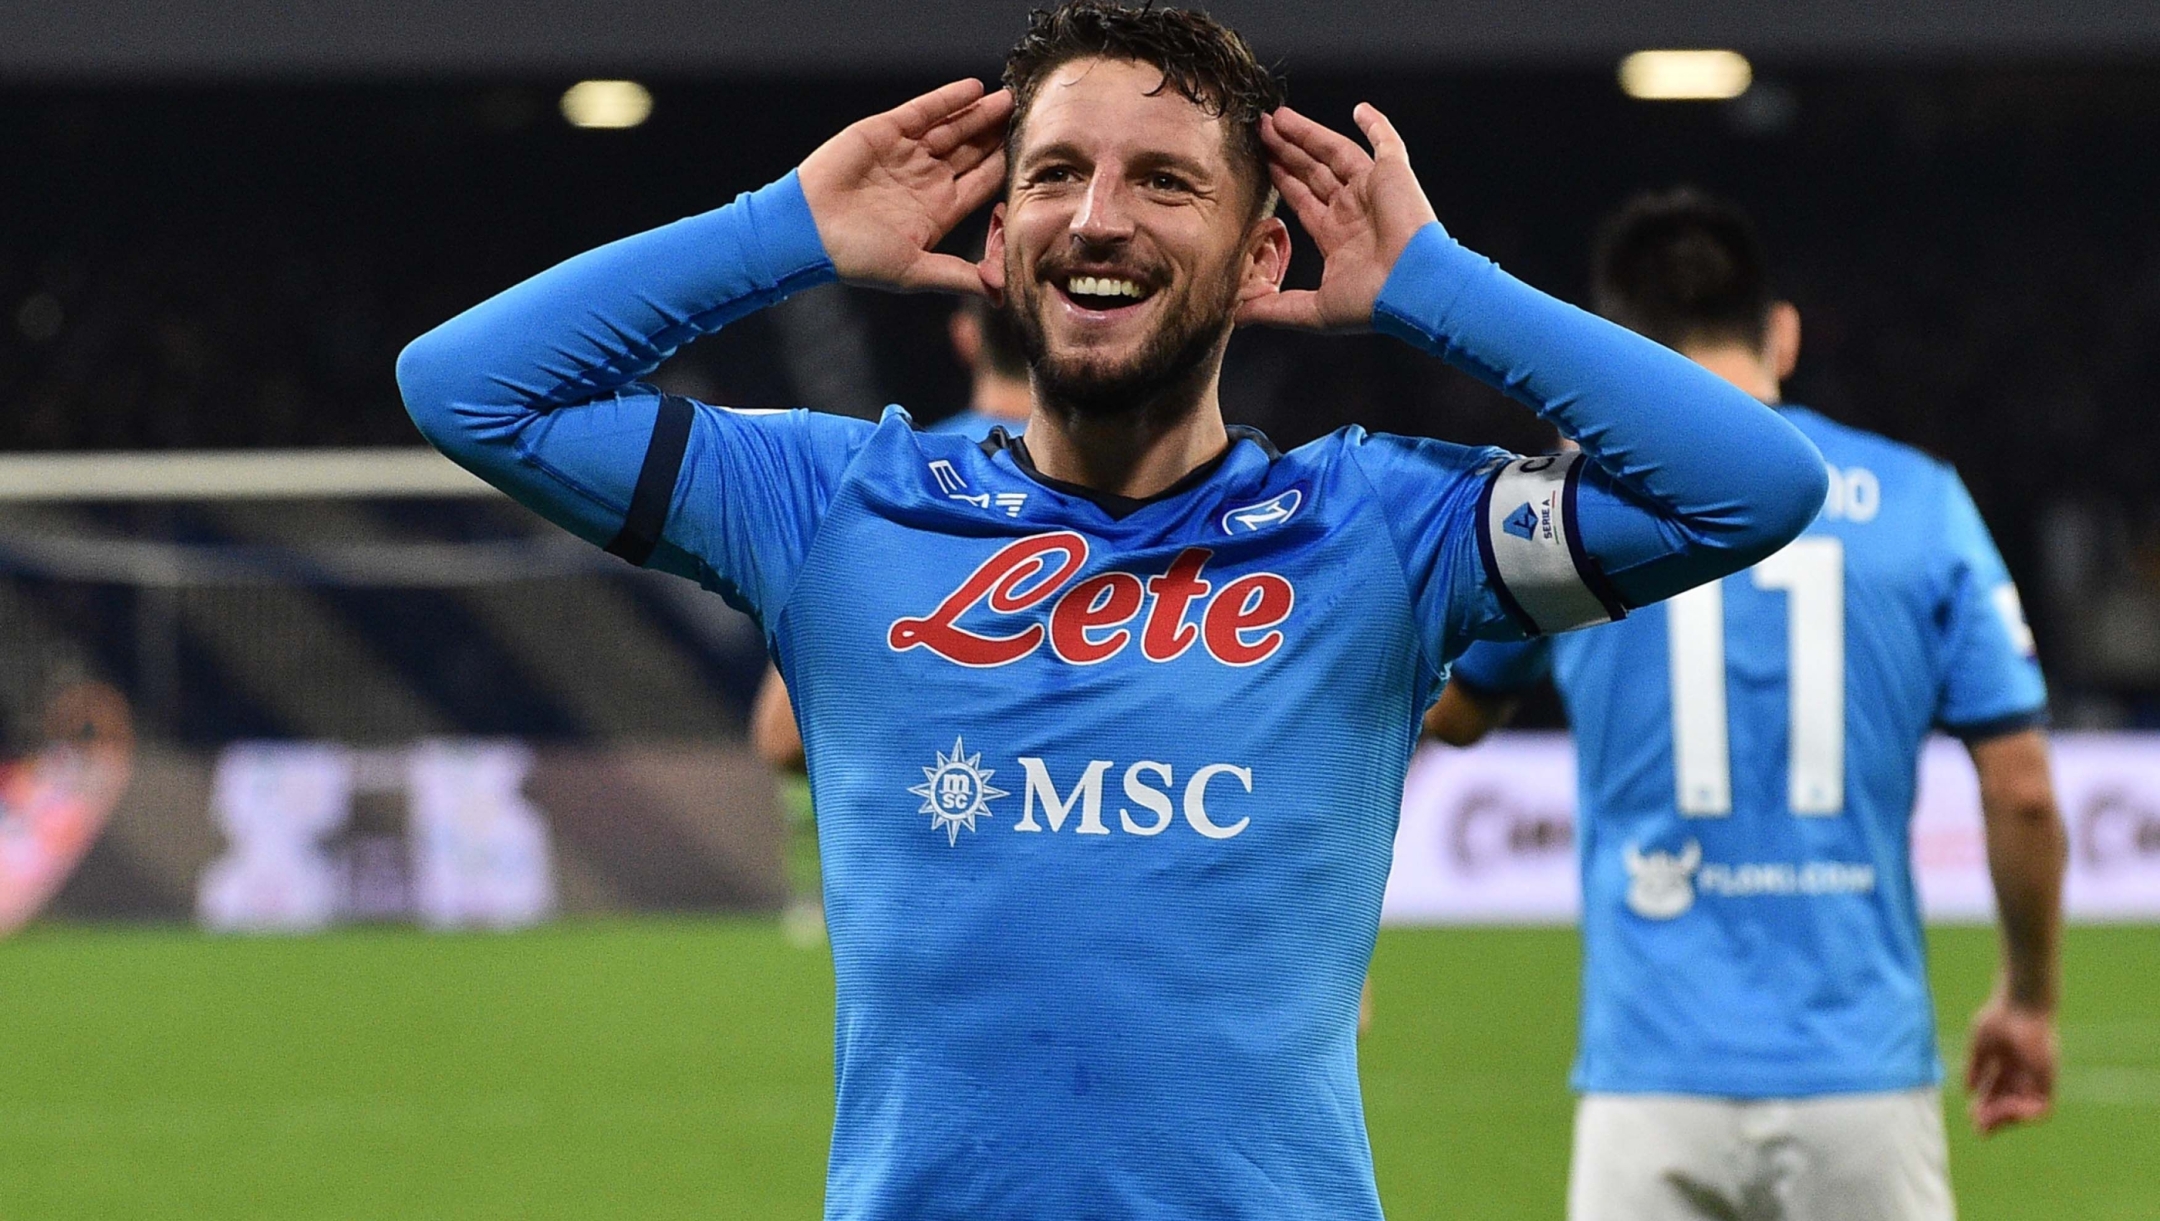 NAPLES, ITALY - DECEMBER 04: Dries Mertens of Napoli celebrates after scoring the second goal of Napoli during the Serie A match between SSC Napoli and Atalanta BC at Stadio Diego Armando Maradona on December 04, 2021 in Naples, Italy. (Photo by SSC NAPOLI/SSC NAPOLI via Getty Images)